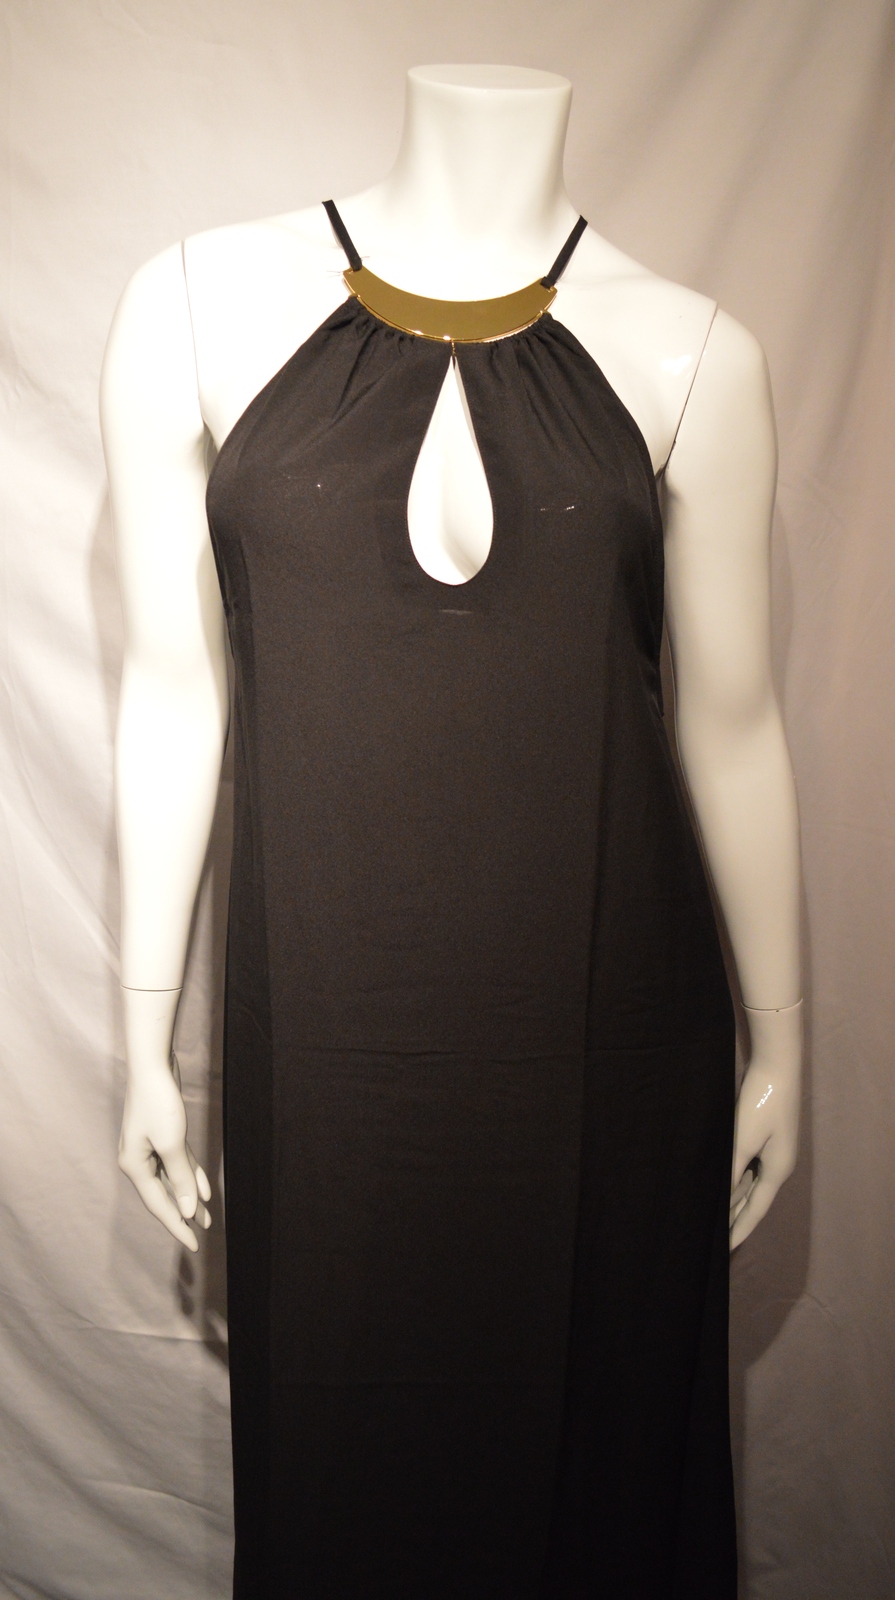 NEW Victoria's Secret Long Black w/ Gold Beach Cover up Dress. Small. NWT $82. - $40.00